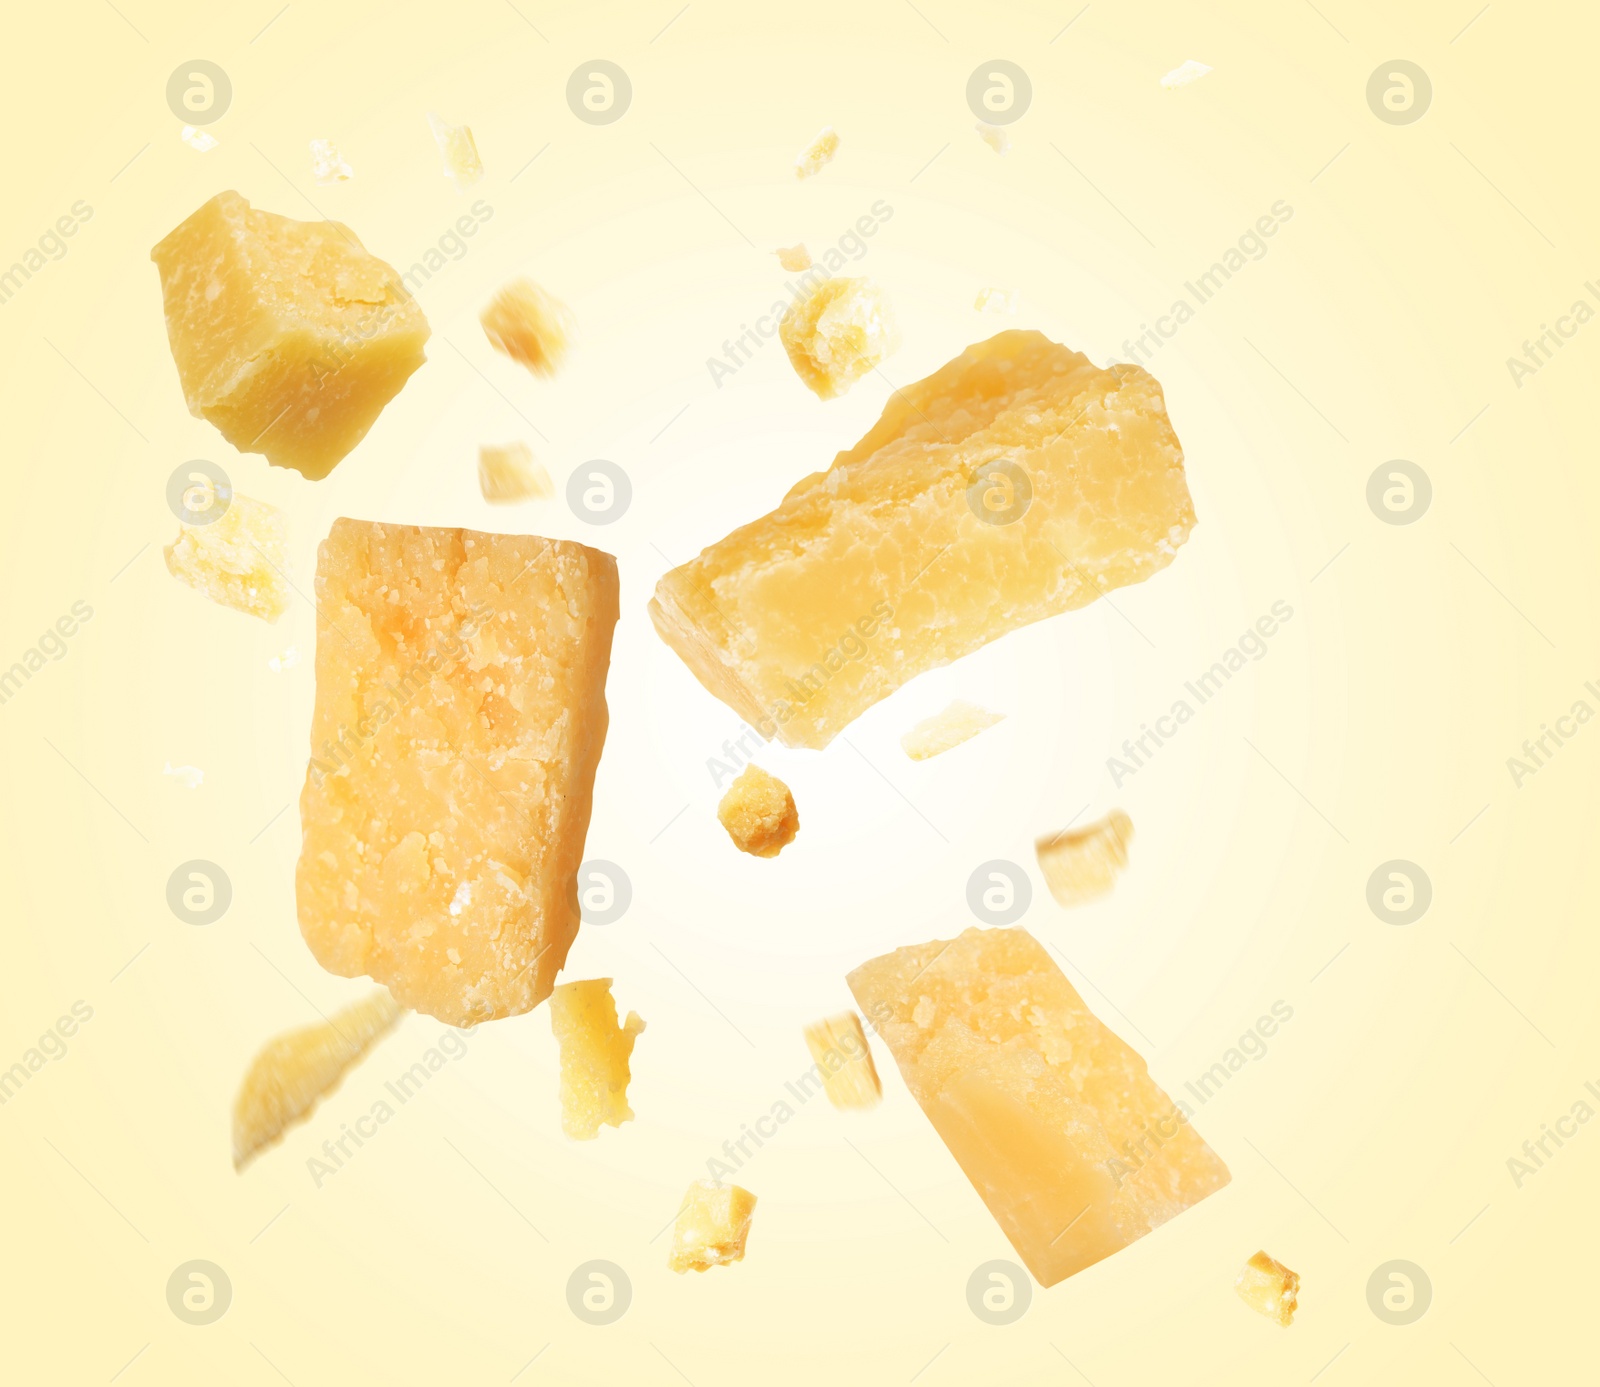 Image of Pieces of delicious parmesan cheese flying on beige background